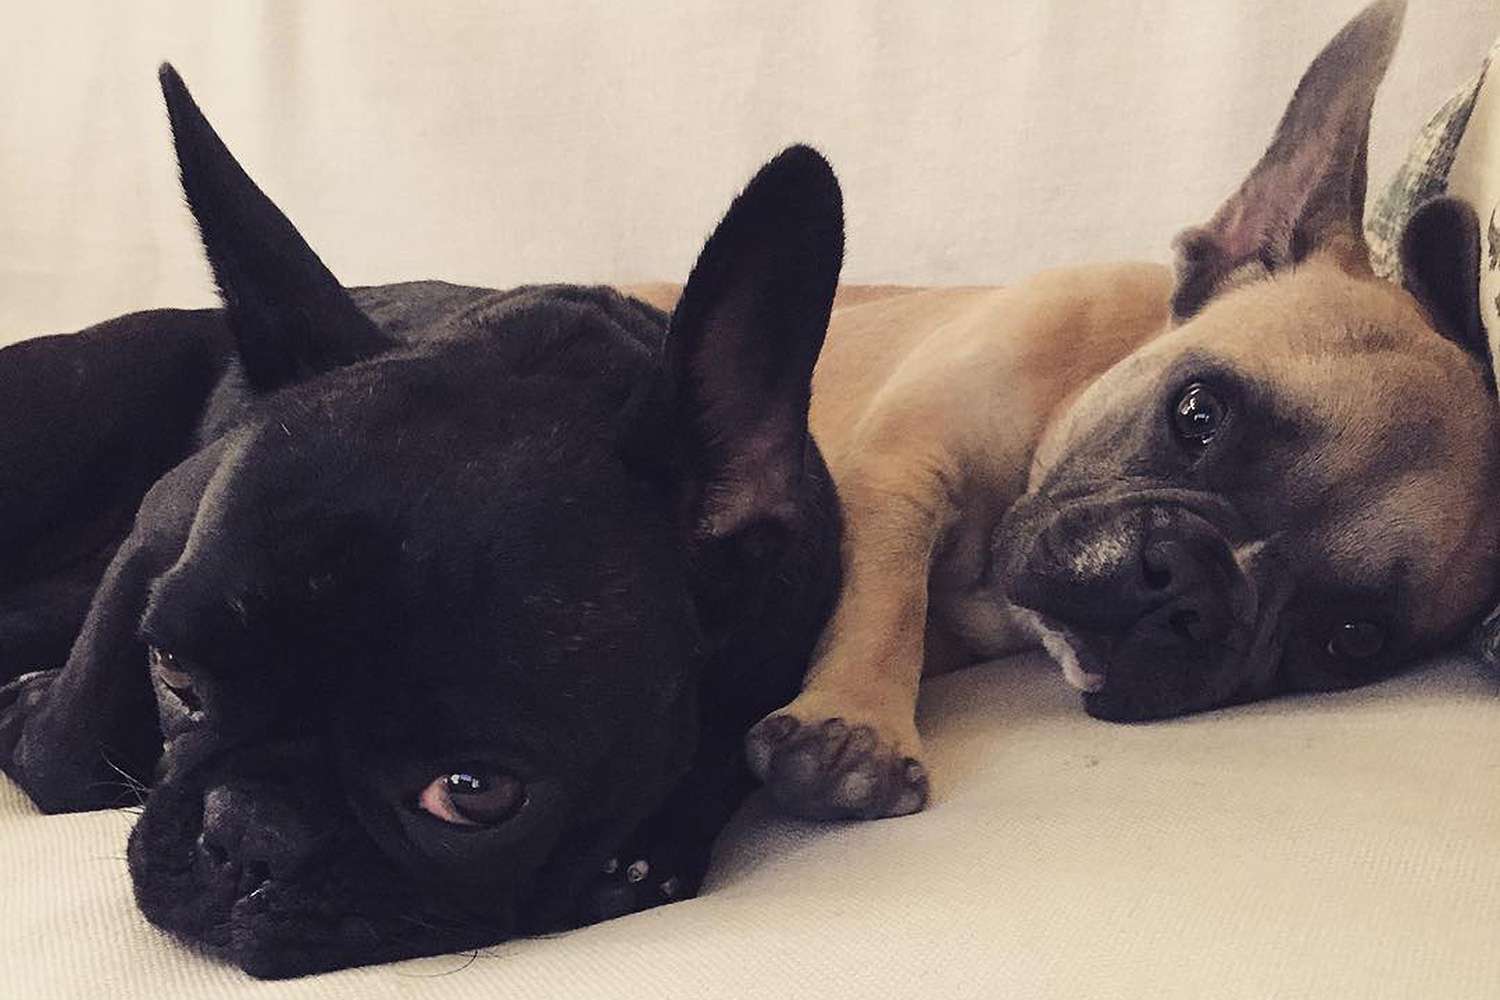 Lady Gaga Dogs Stolen: Photos from Instagram | PEOPLE.com